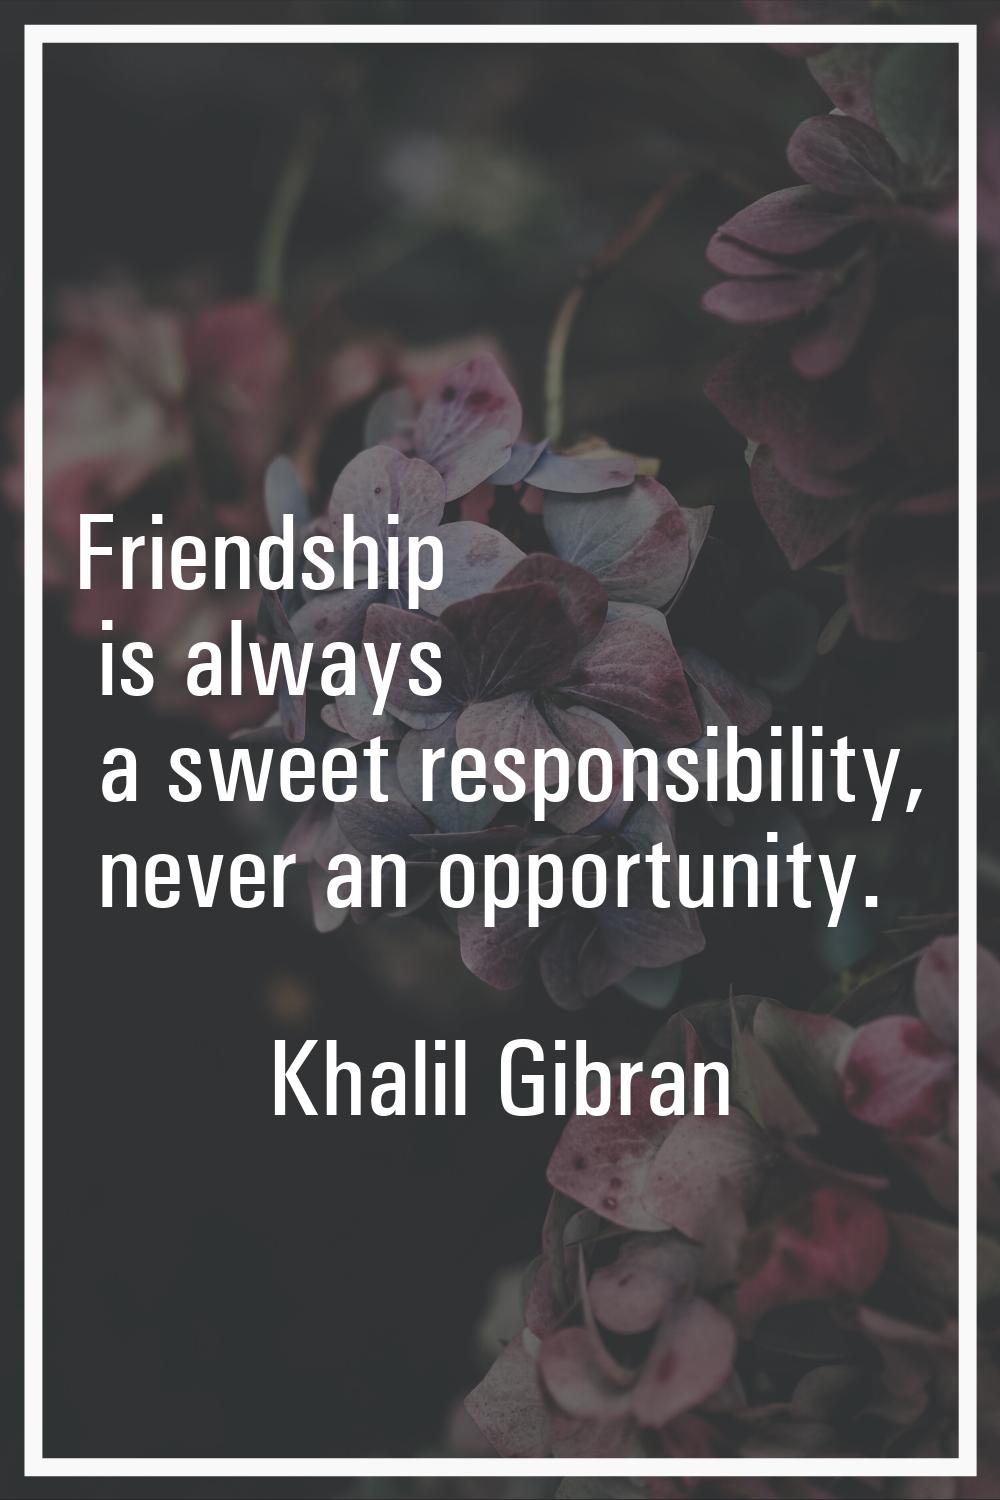 Friendship is always a sweet responsibility, never an opportunity.